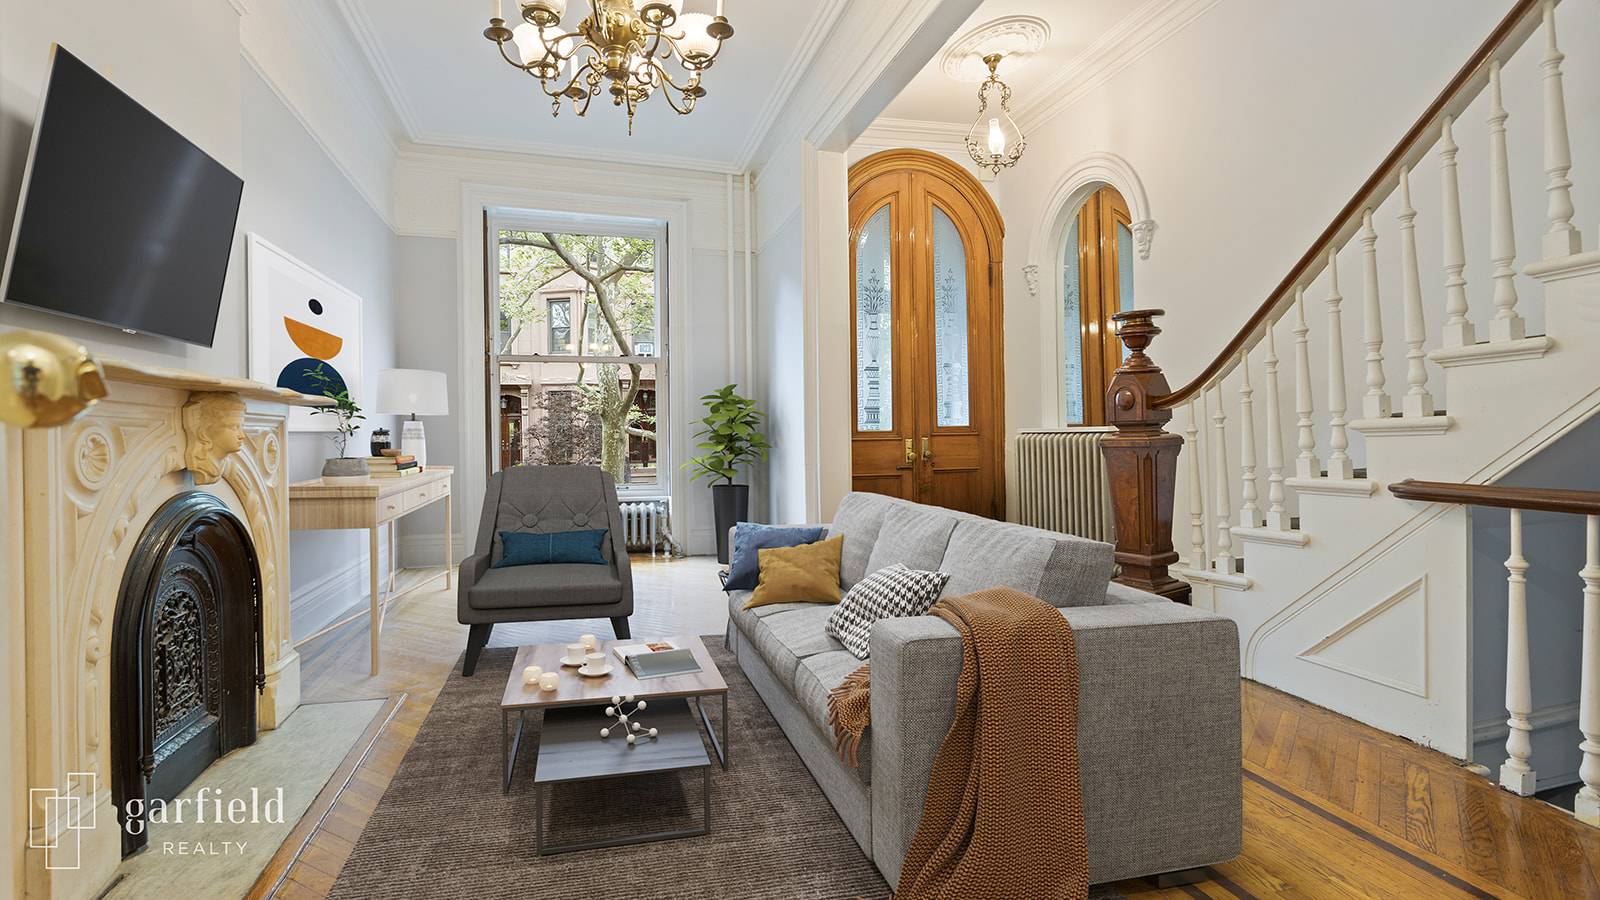 Offering quintessential brownstone charm, this exquisite turn key triplex was renovated by the owners in 2008.